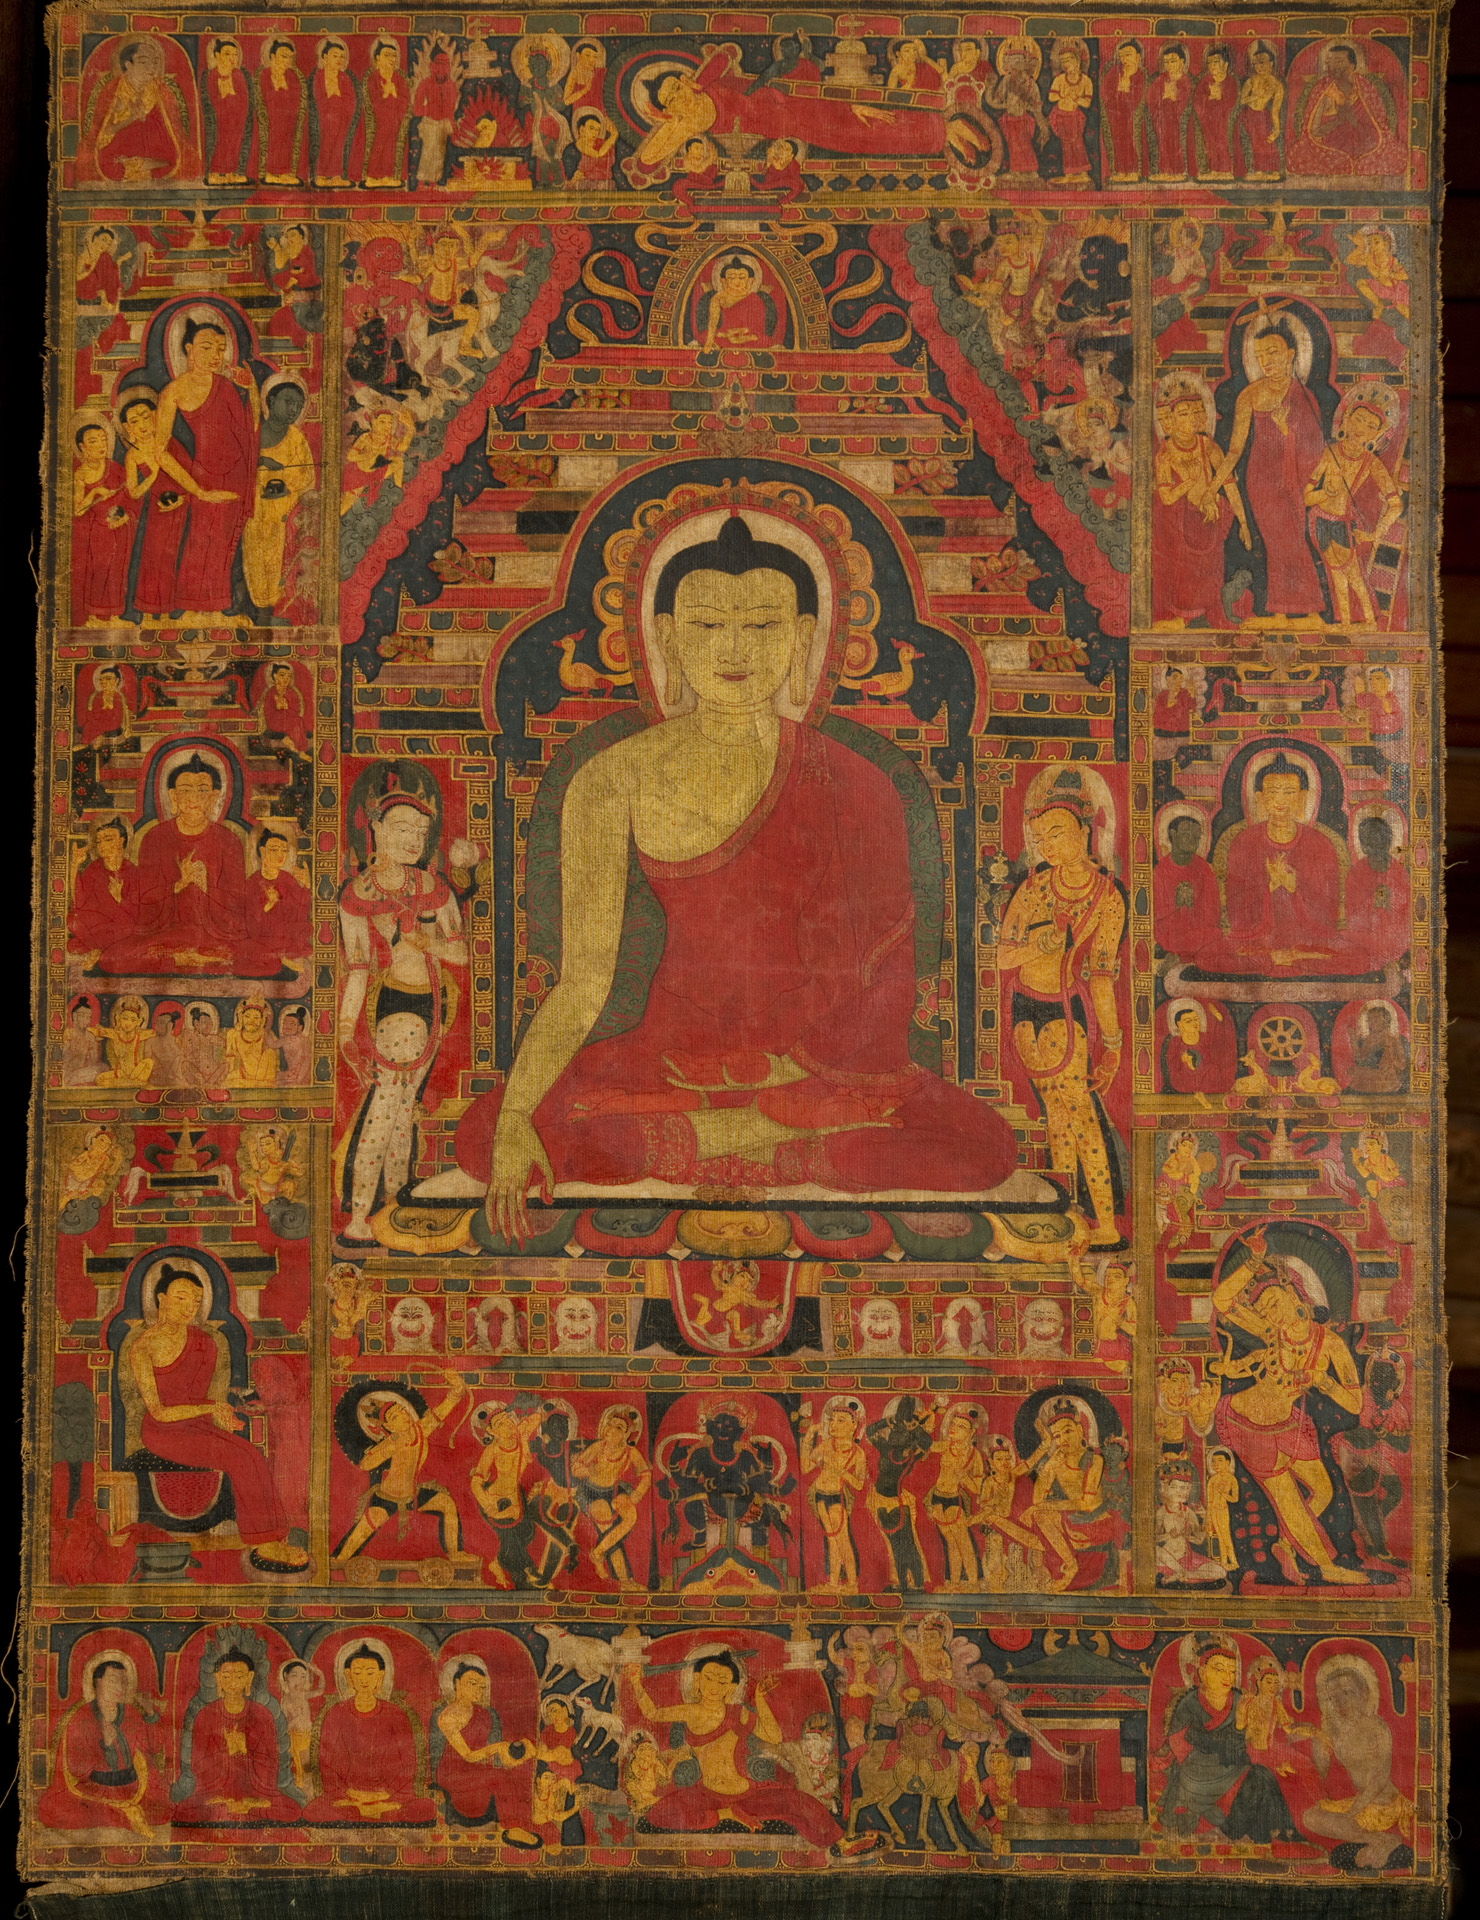 Painting in crimson-red and burnt orange depicting seated Buddha surrounded by profusion of scenes and figures arranged in five registers